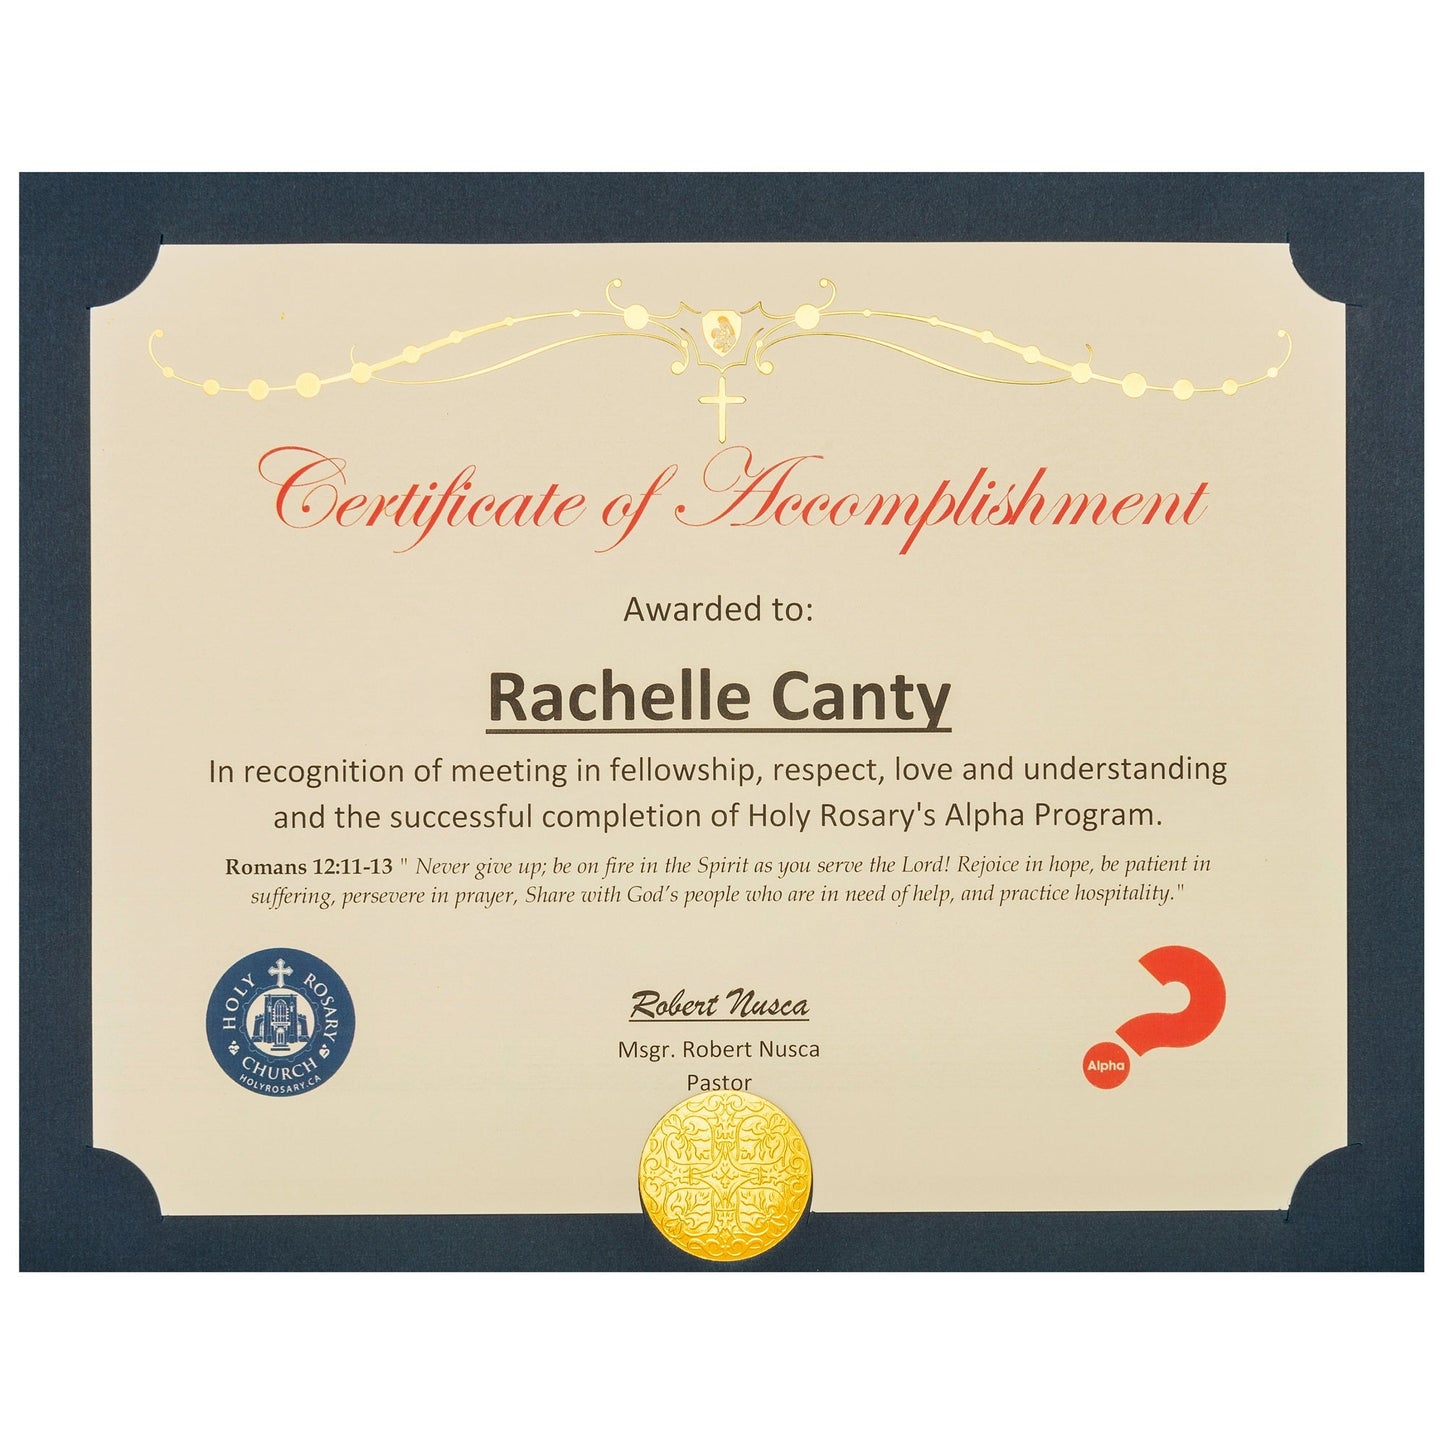 St. James® Religious Certificates with Holy Rosary Banner, Gold Foil Engraved Design on 65lb Ivory Card, Pack of 50